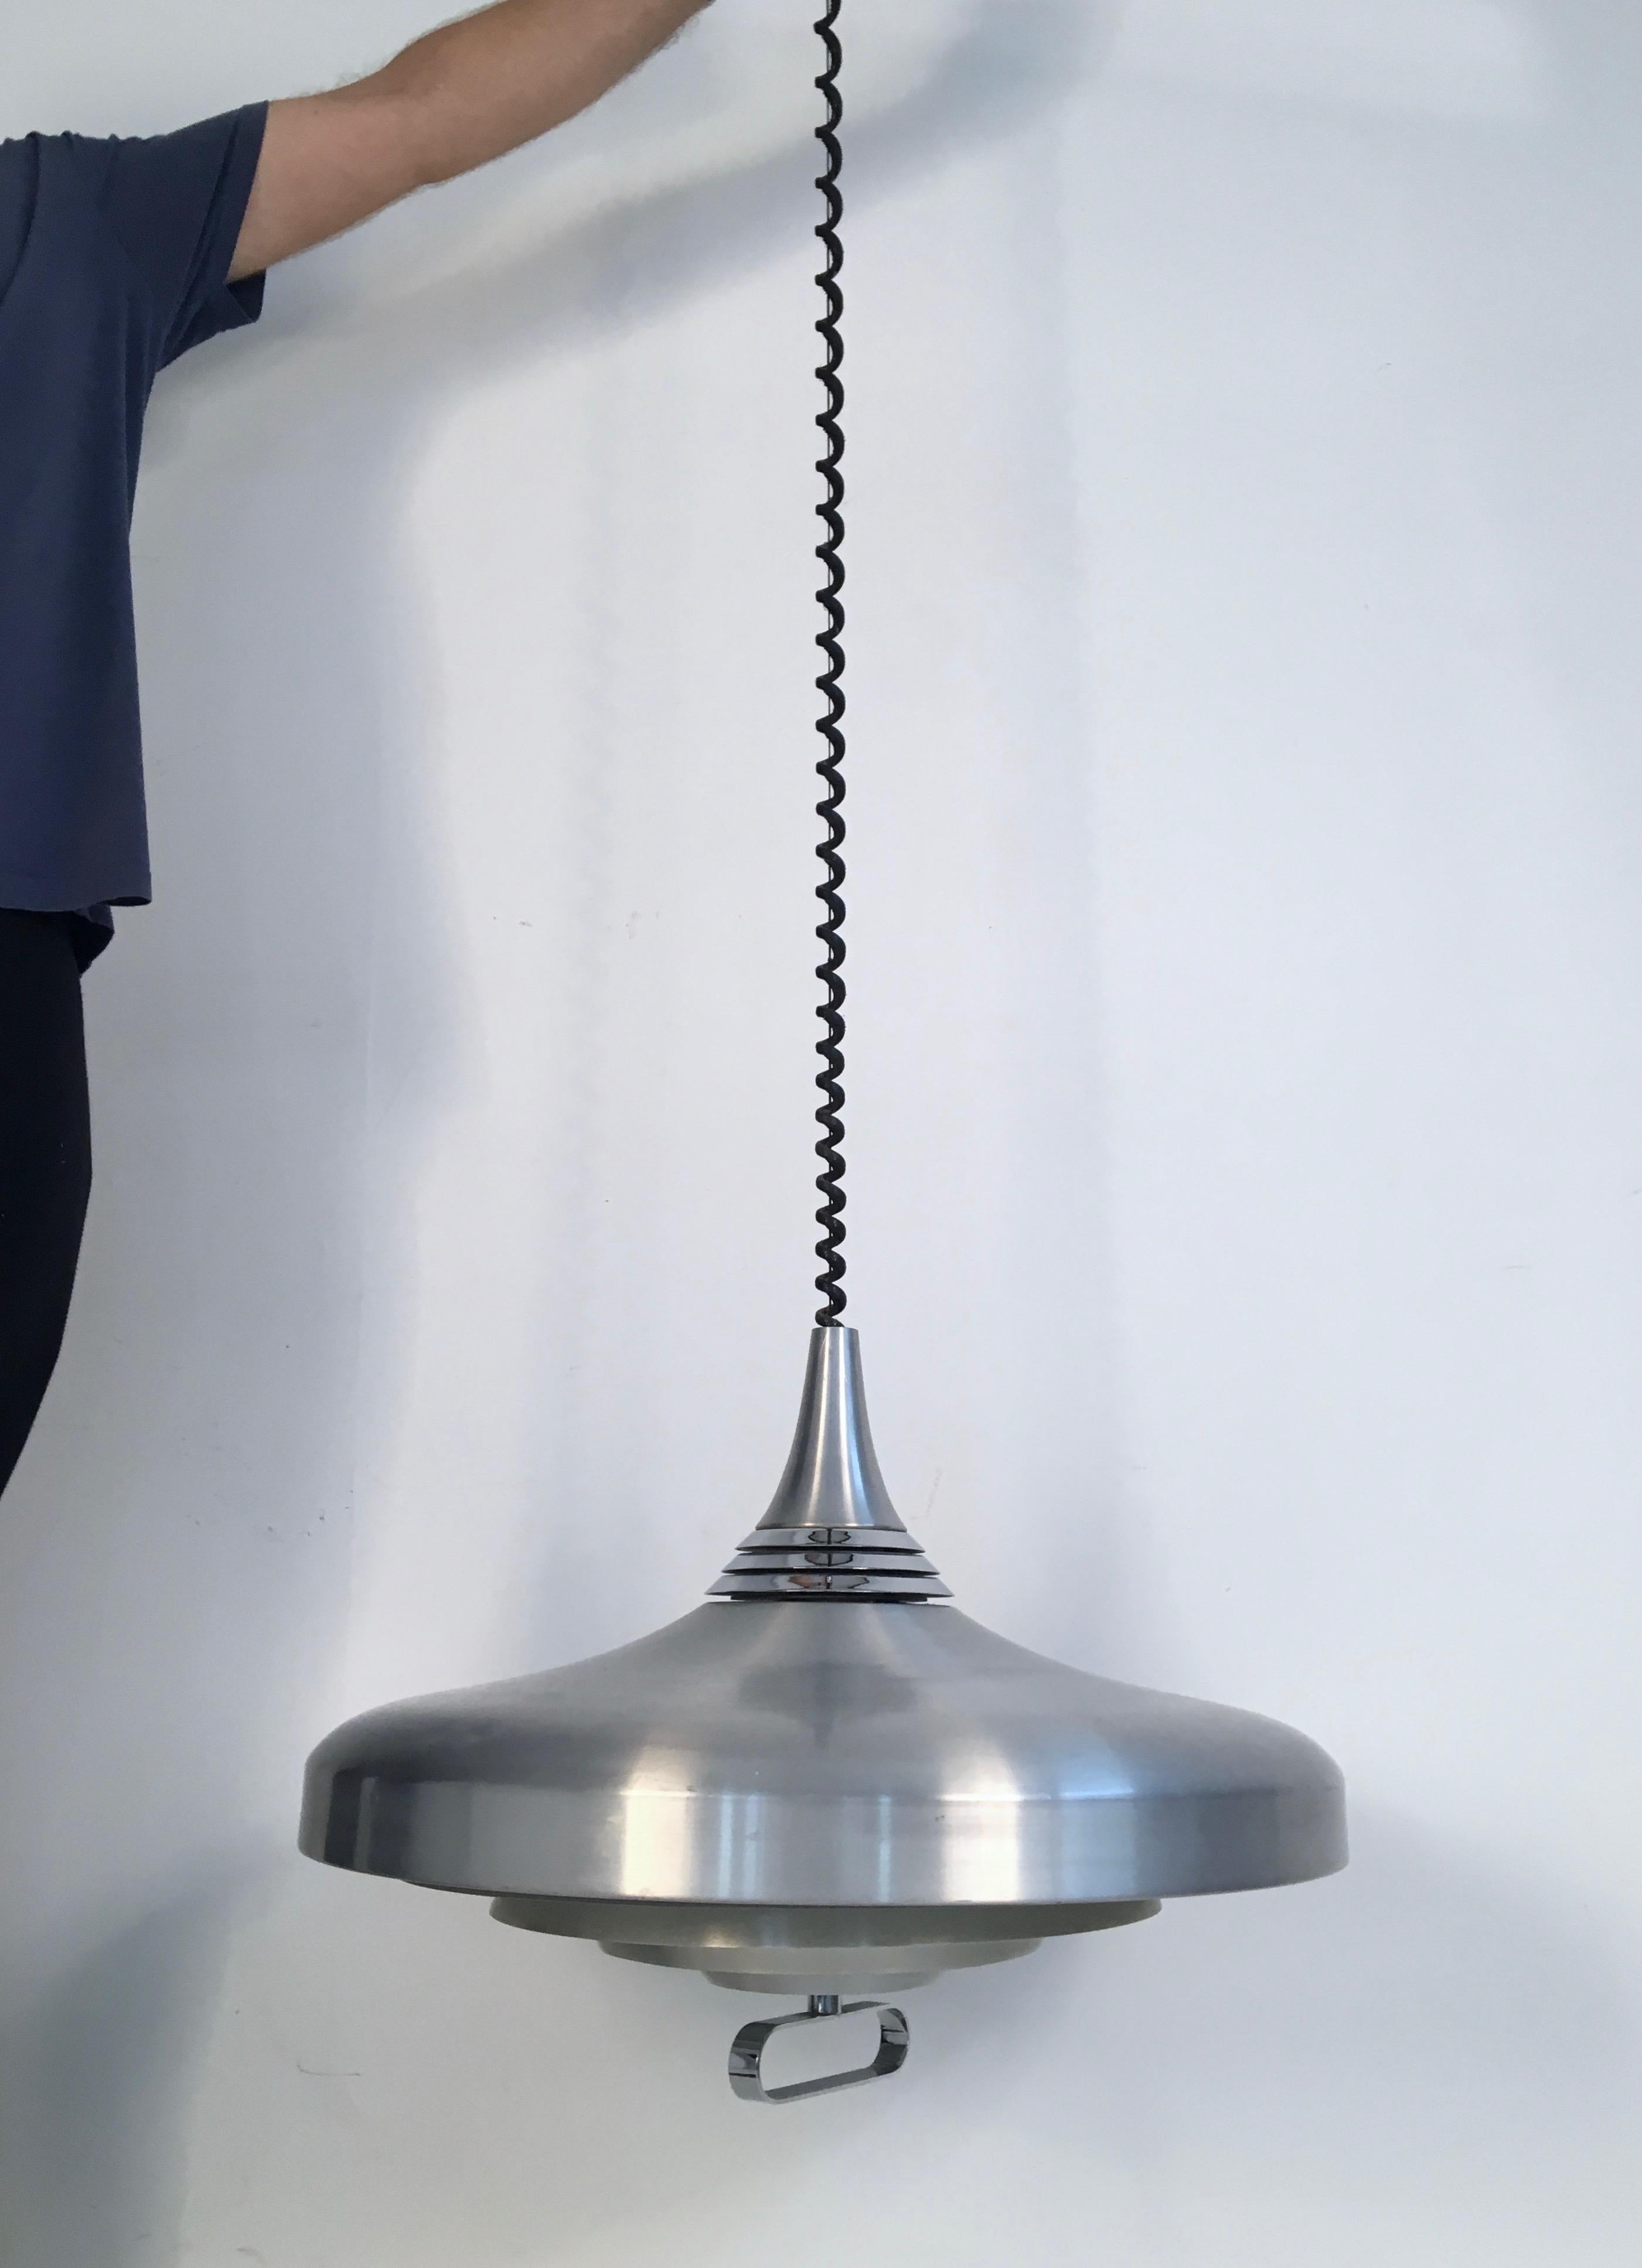 Aluminum Large Midcentury Pull Down Pendant Lamp Shade, Italy, circa 1970 For Sale